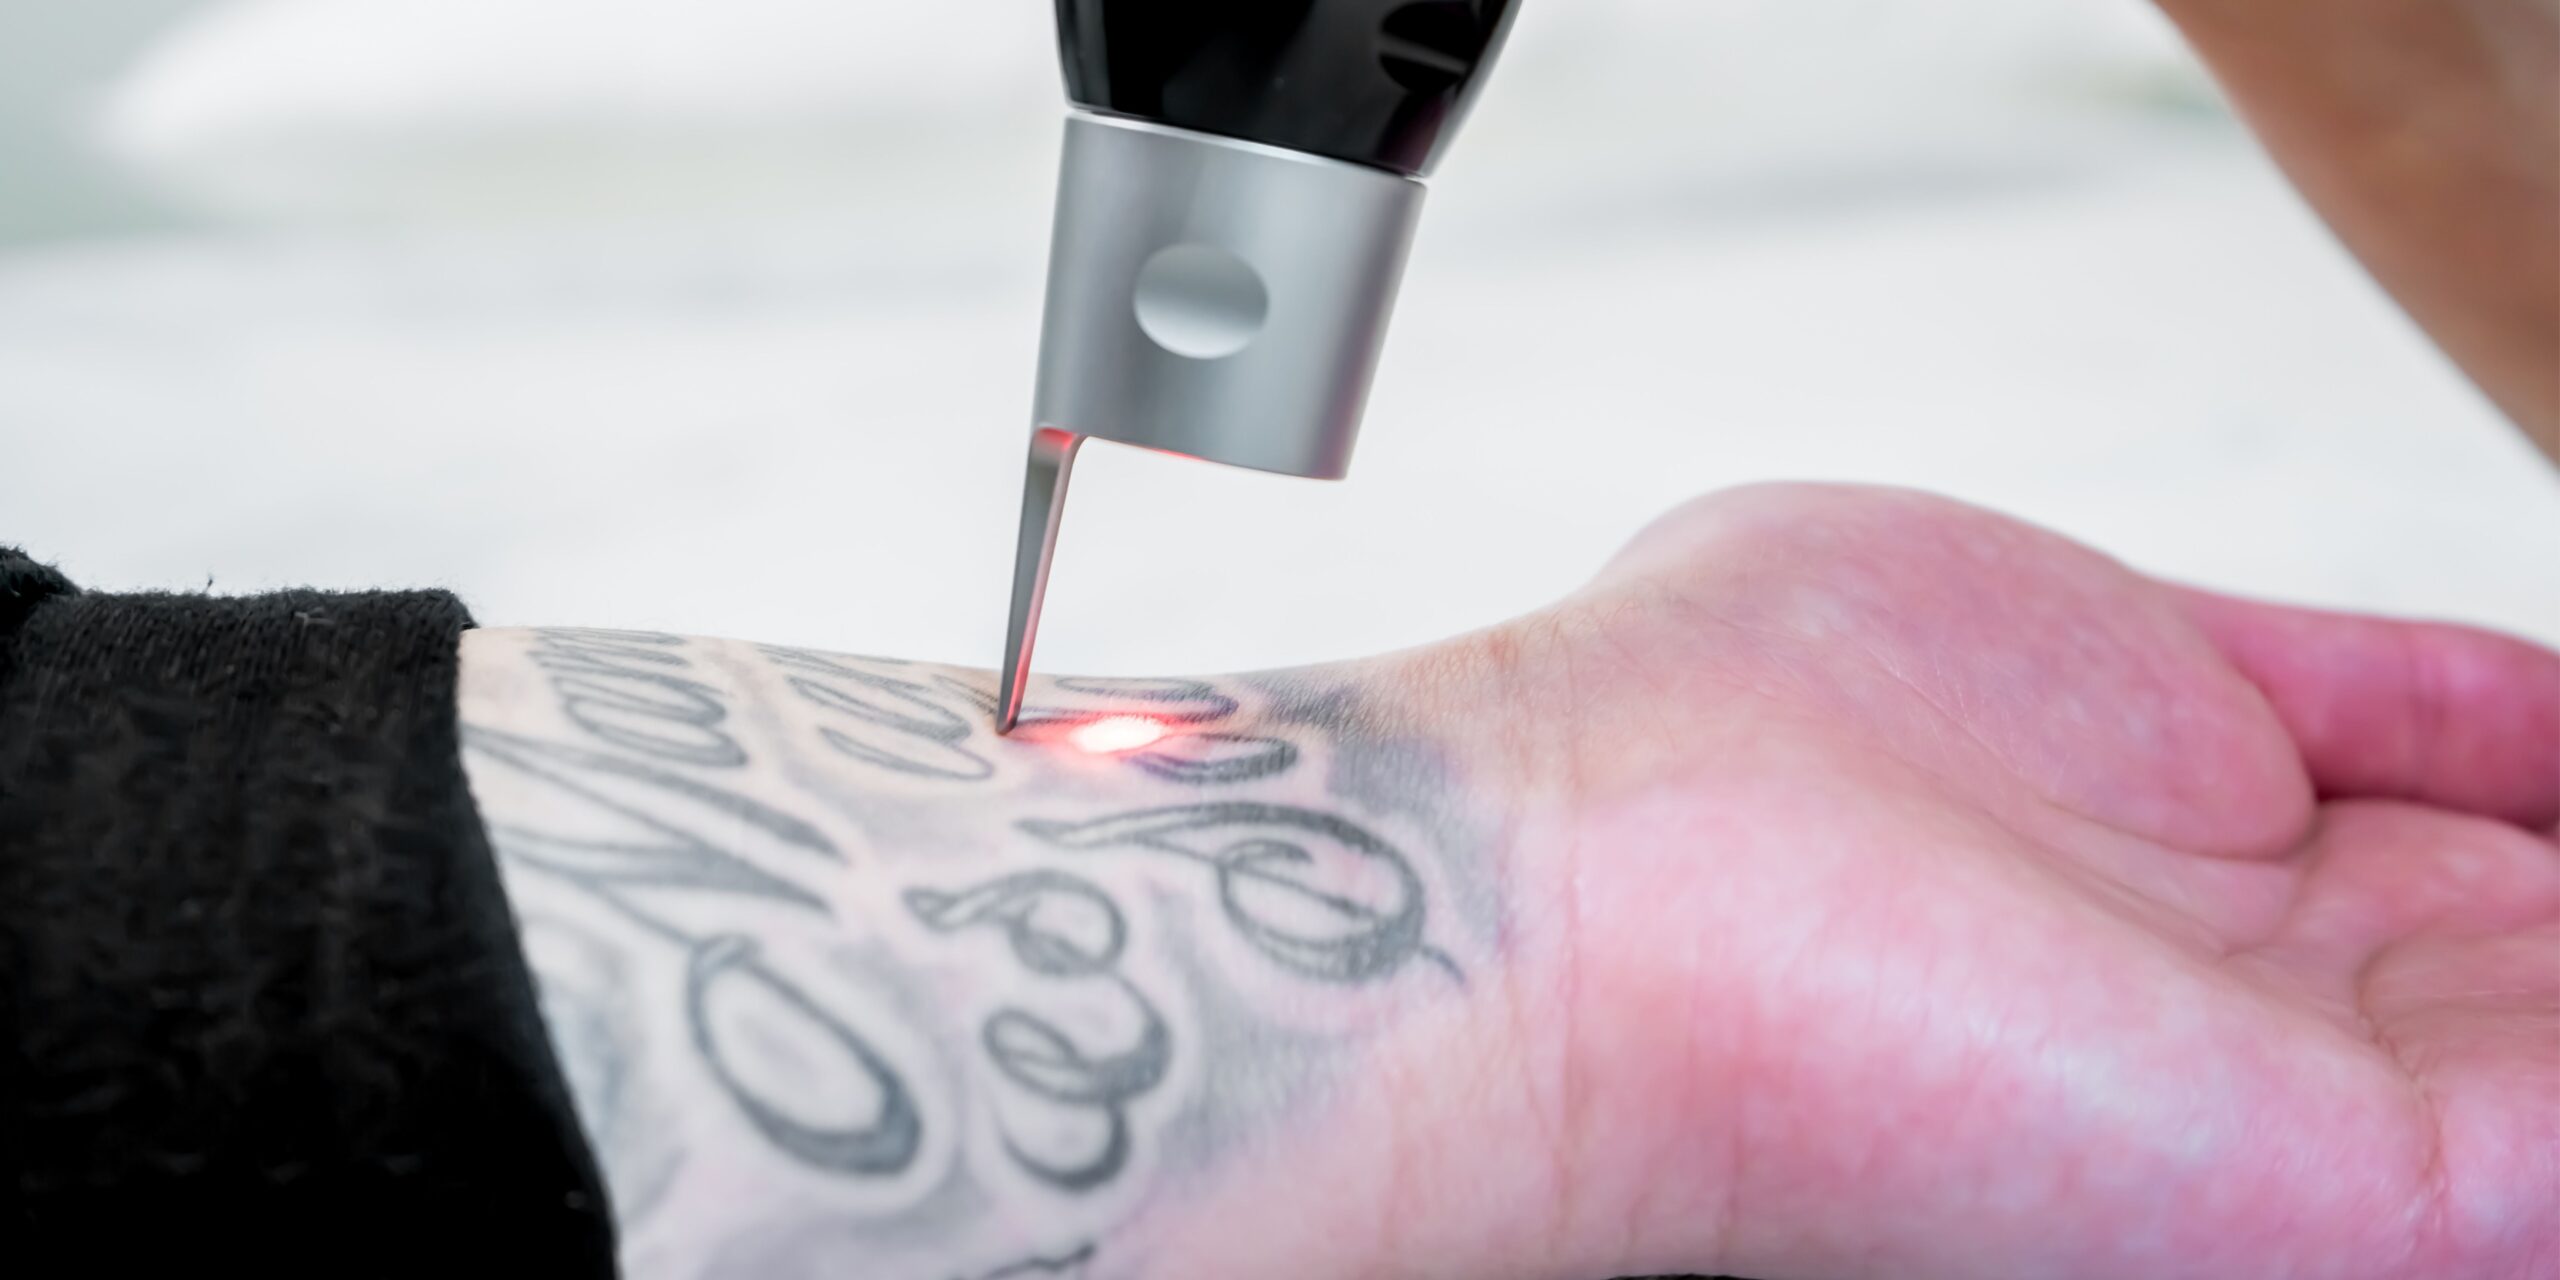 What Should You Expect From Tattoo Removal Treatments? - Reno Sparks Medspa